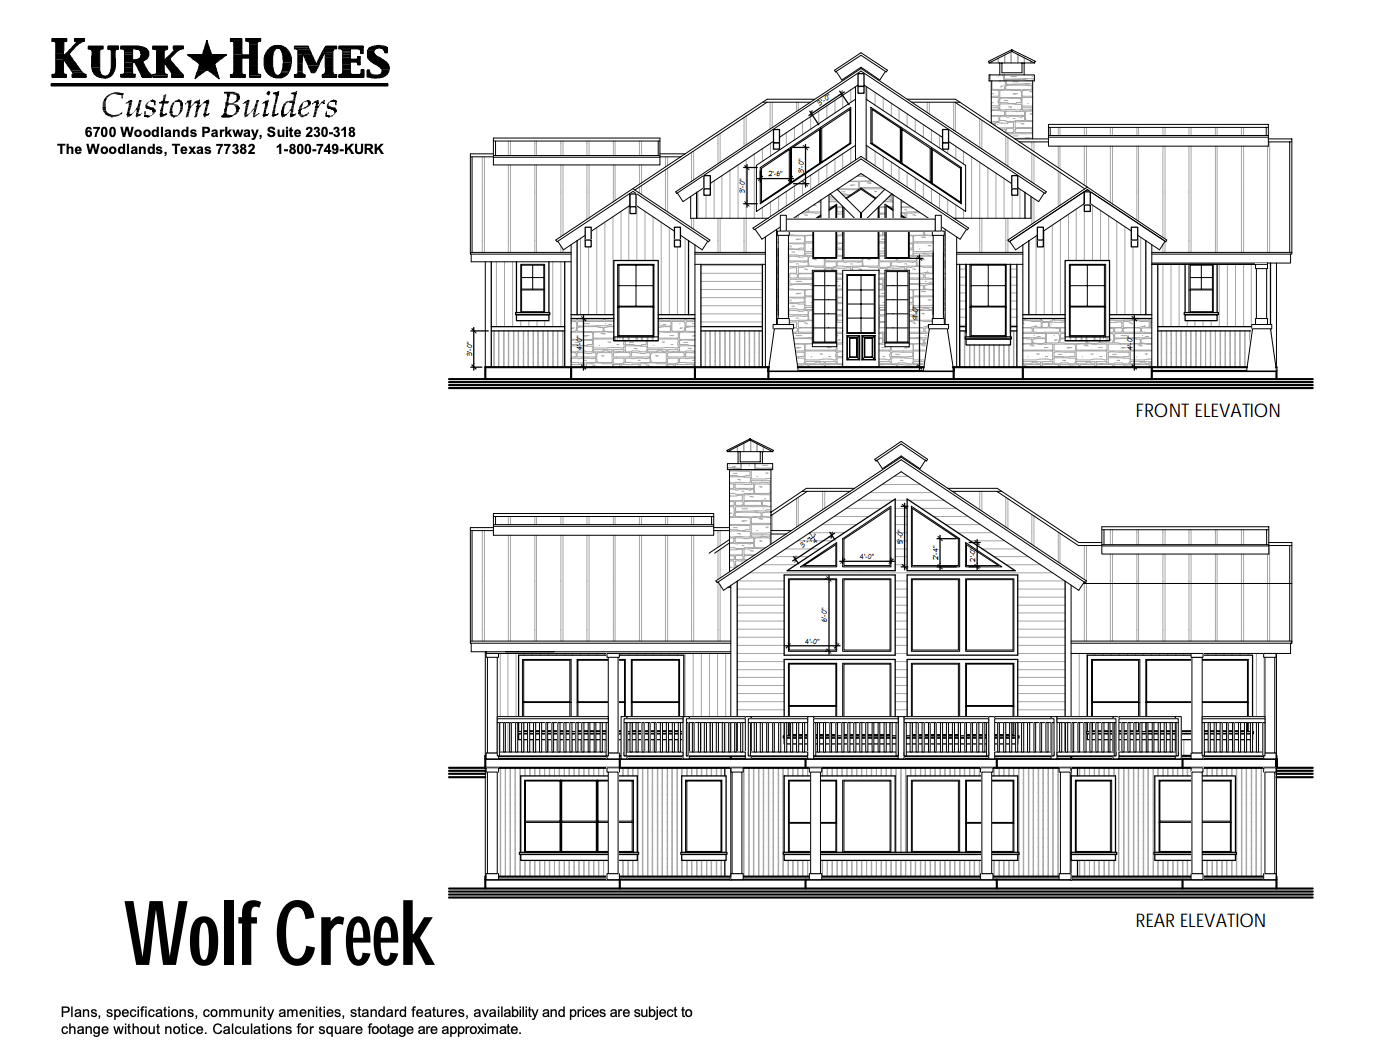 The Wolf Creek - Elevation